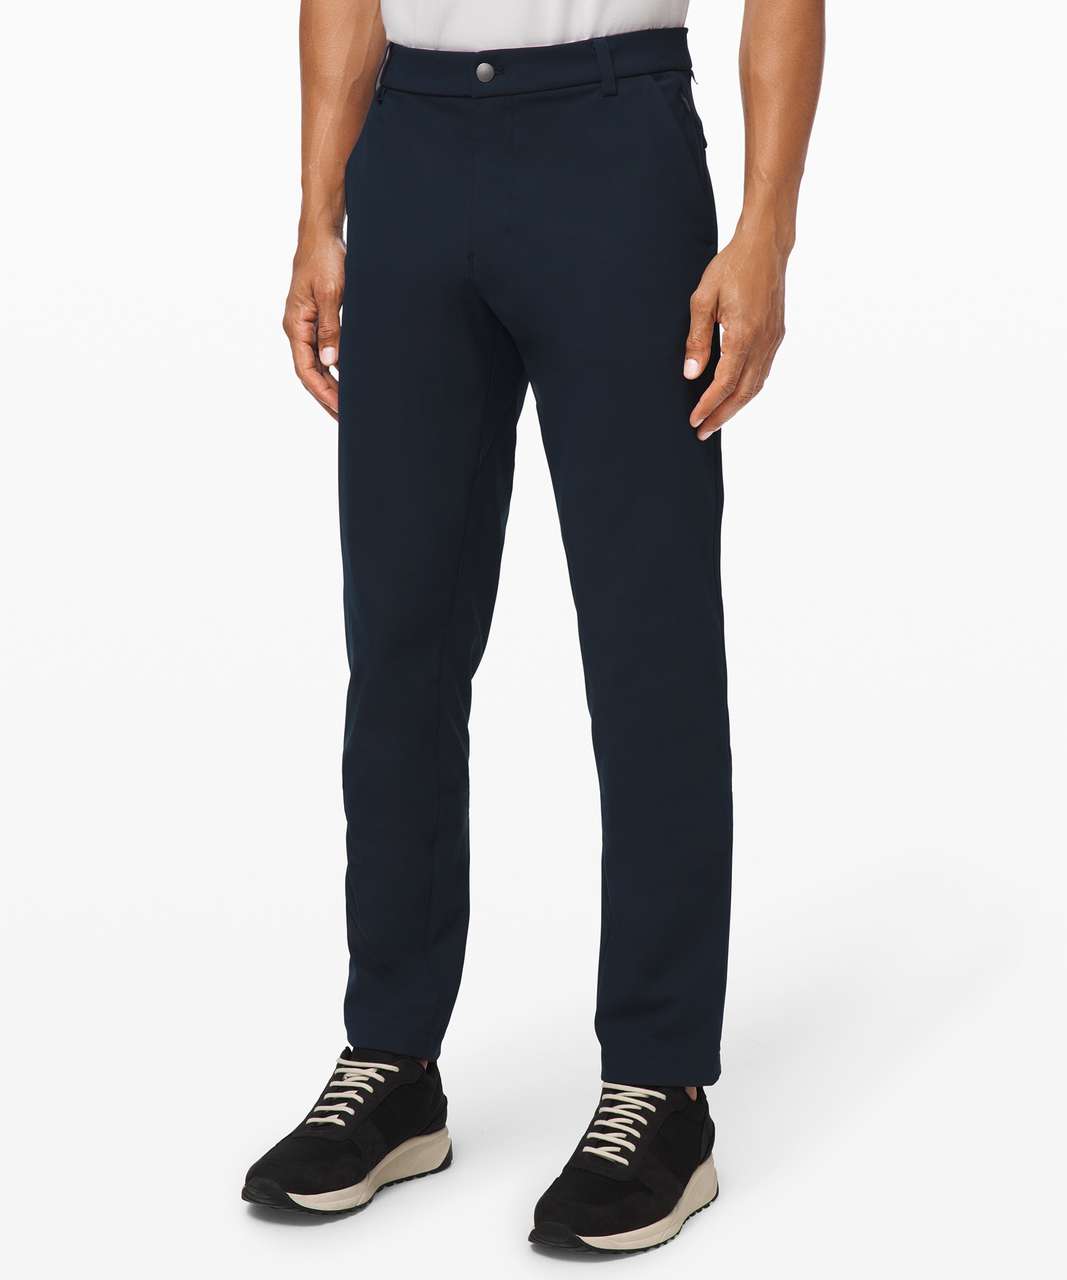 Lululemon Commission Pant Classic *Warpstreme 34" - True Navy (First Release)